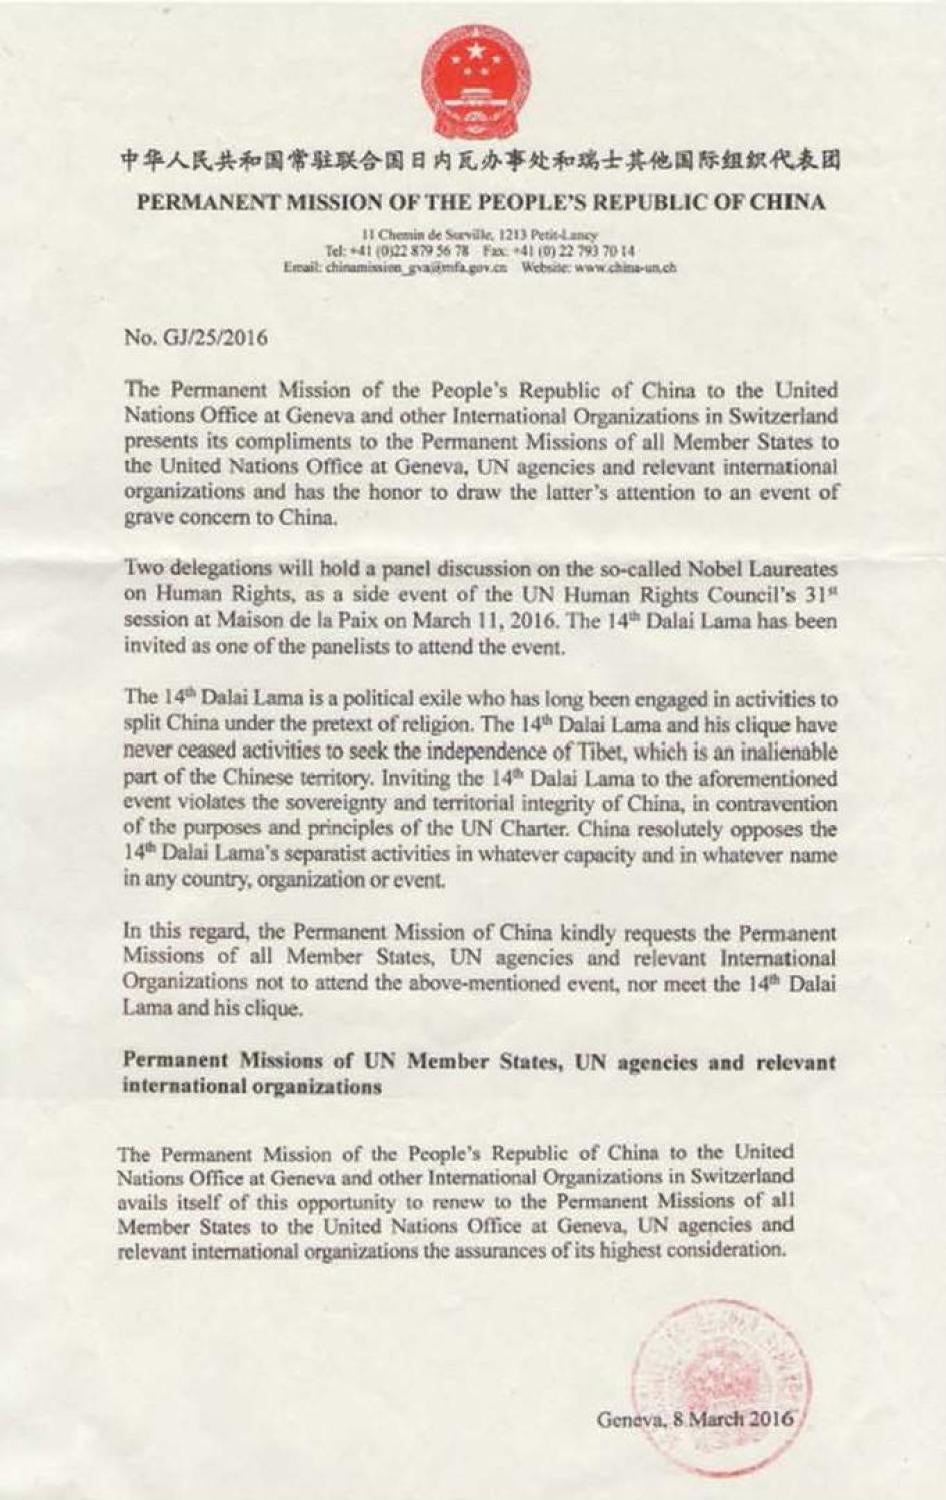 Document titled "Permanent Mission of the People's Republic of China"